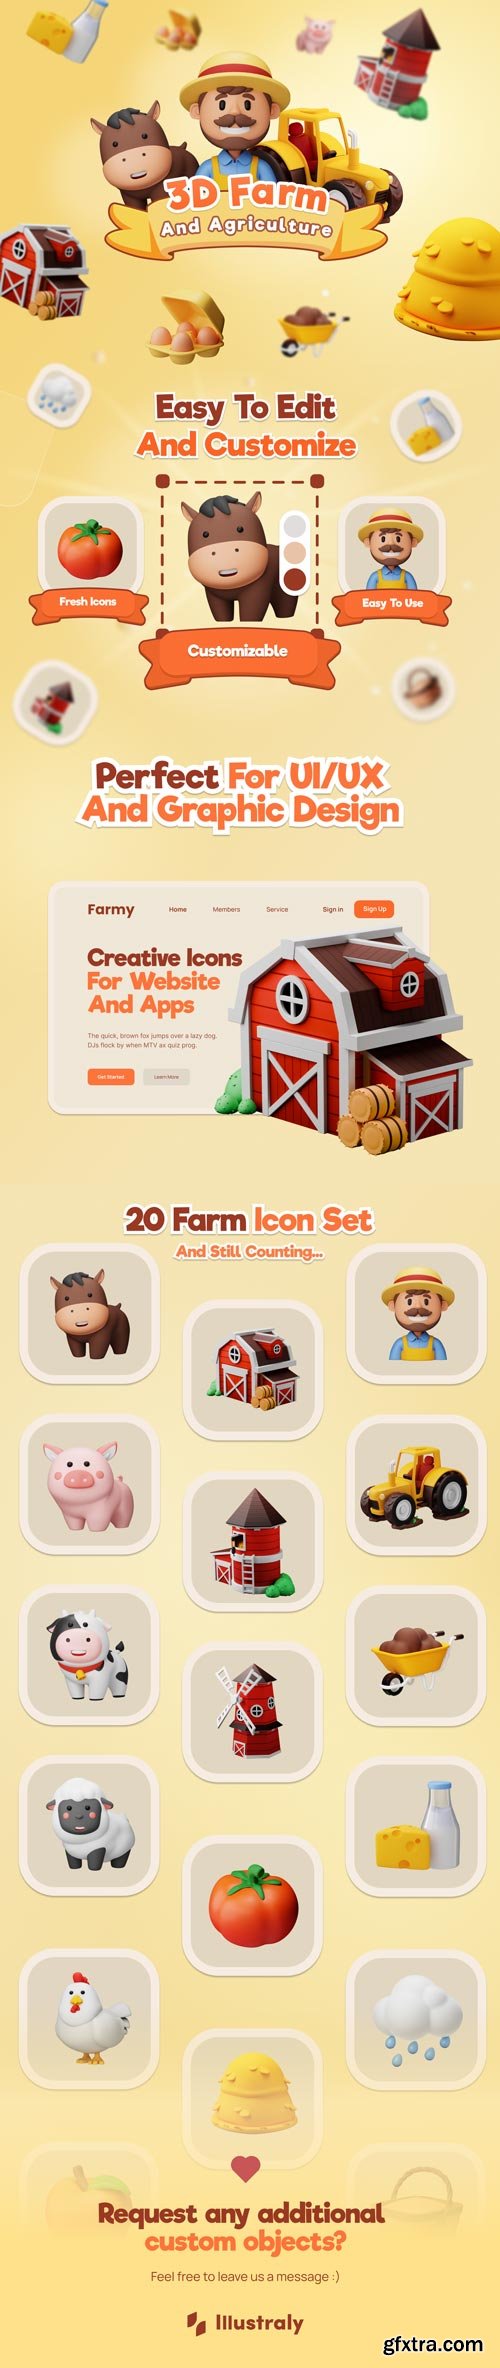 Farmy - Farm And Agriculture 3D Icon Set Model